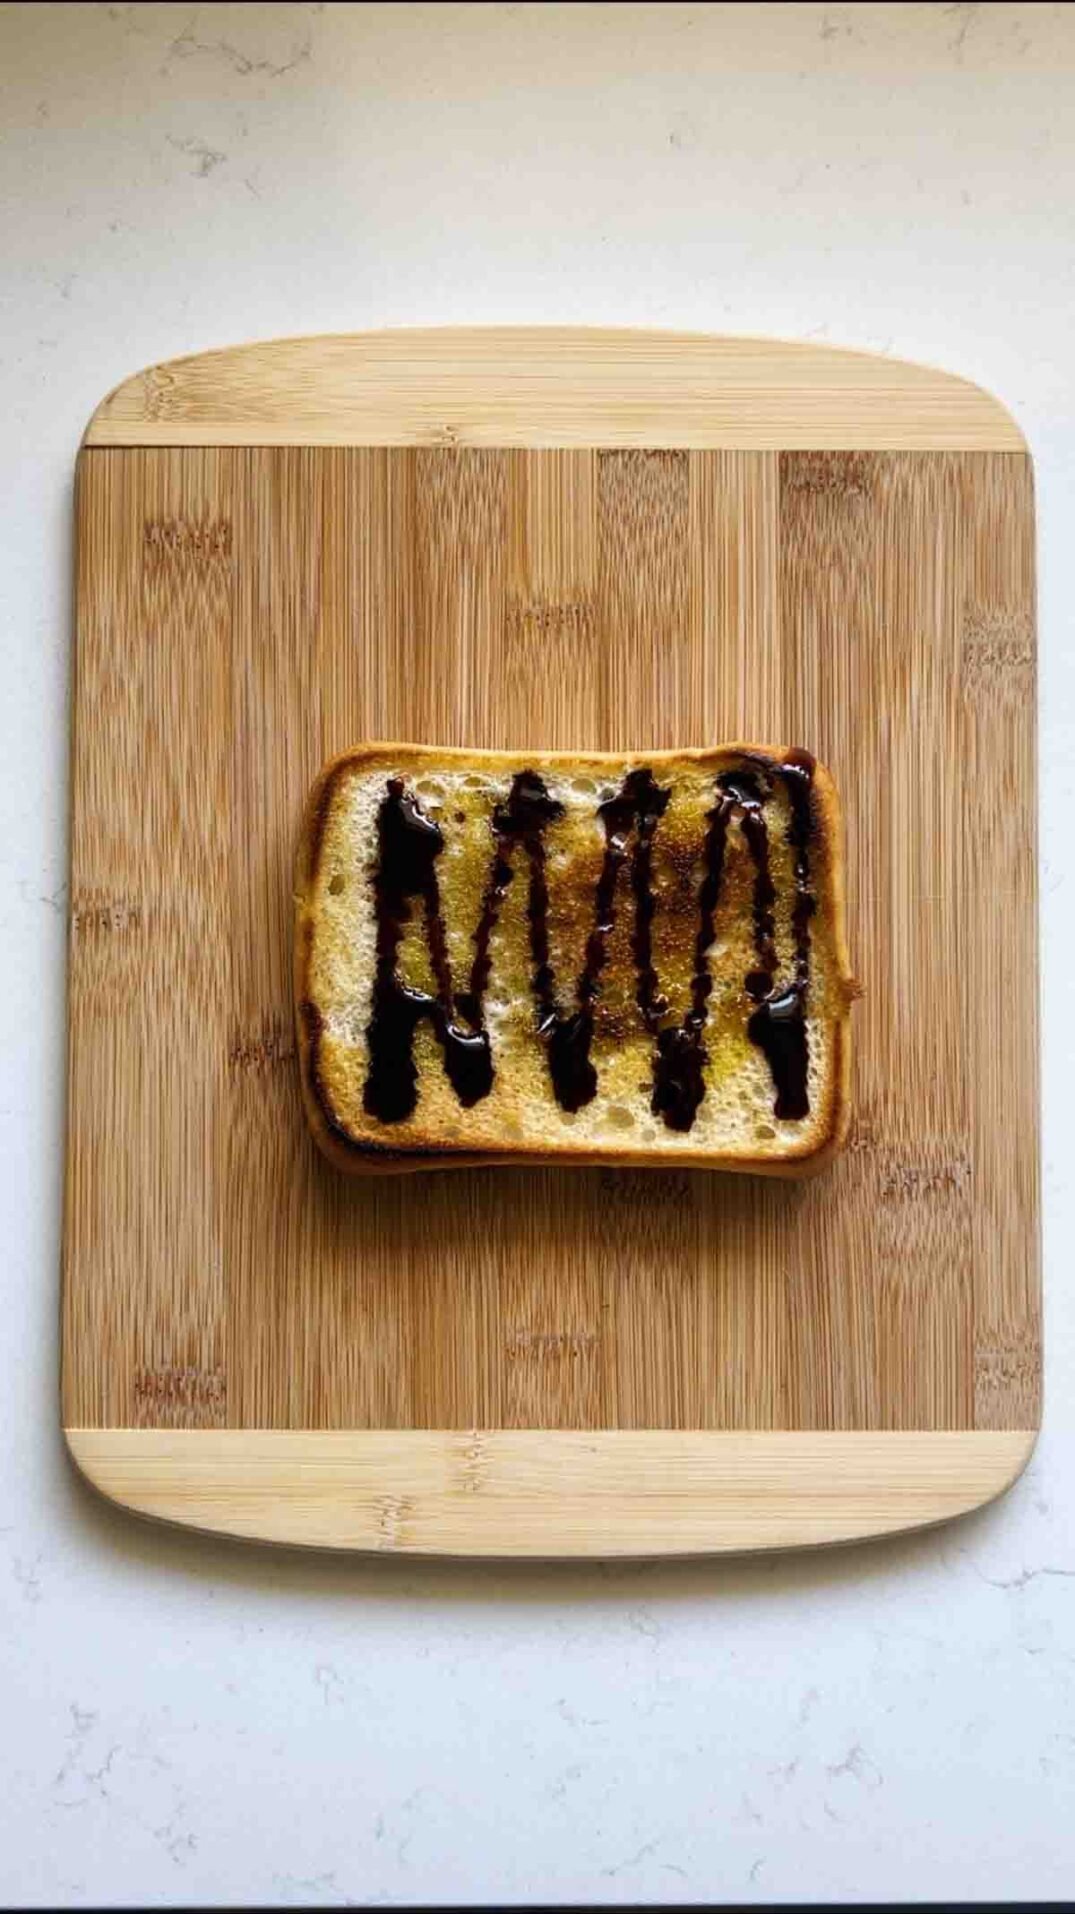 a drizzle of balsamic glaze on an olive oil toasted piece of ciabatta bread.